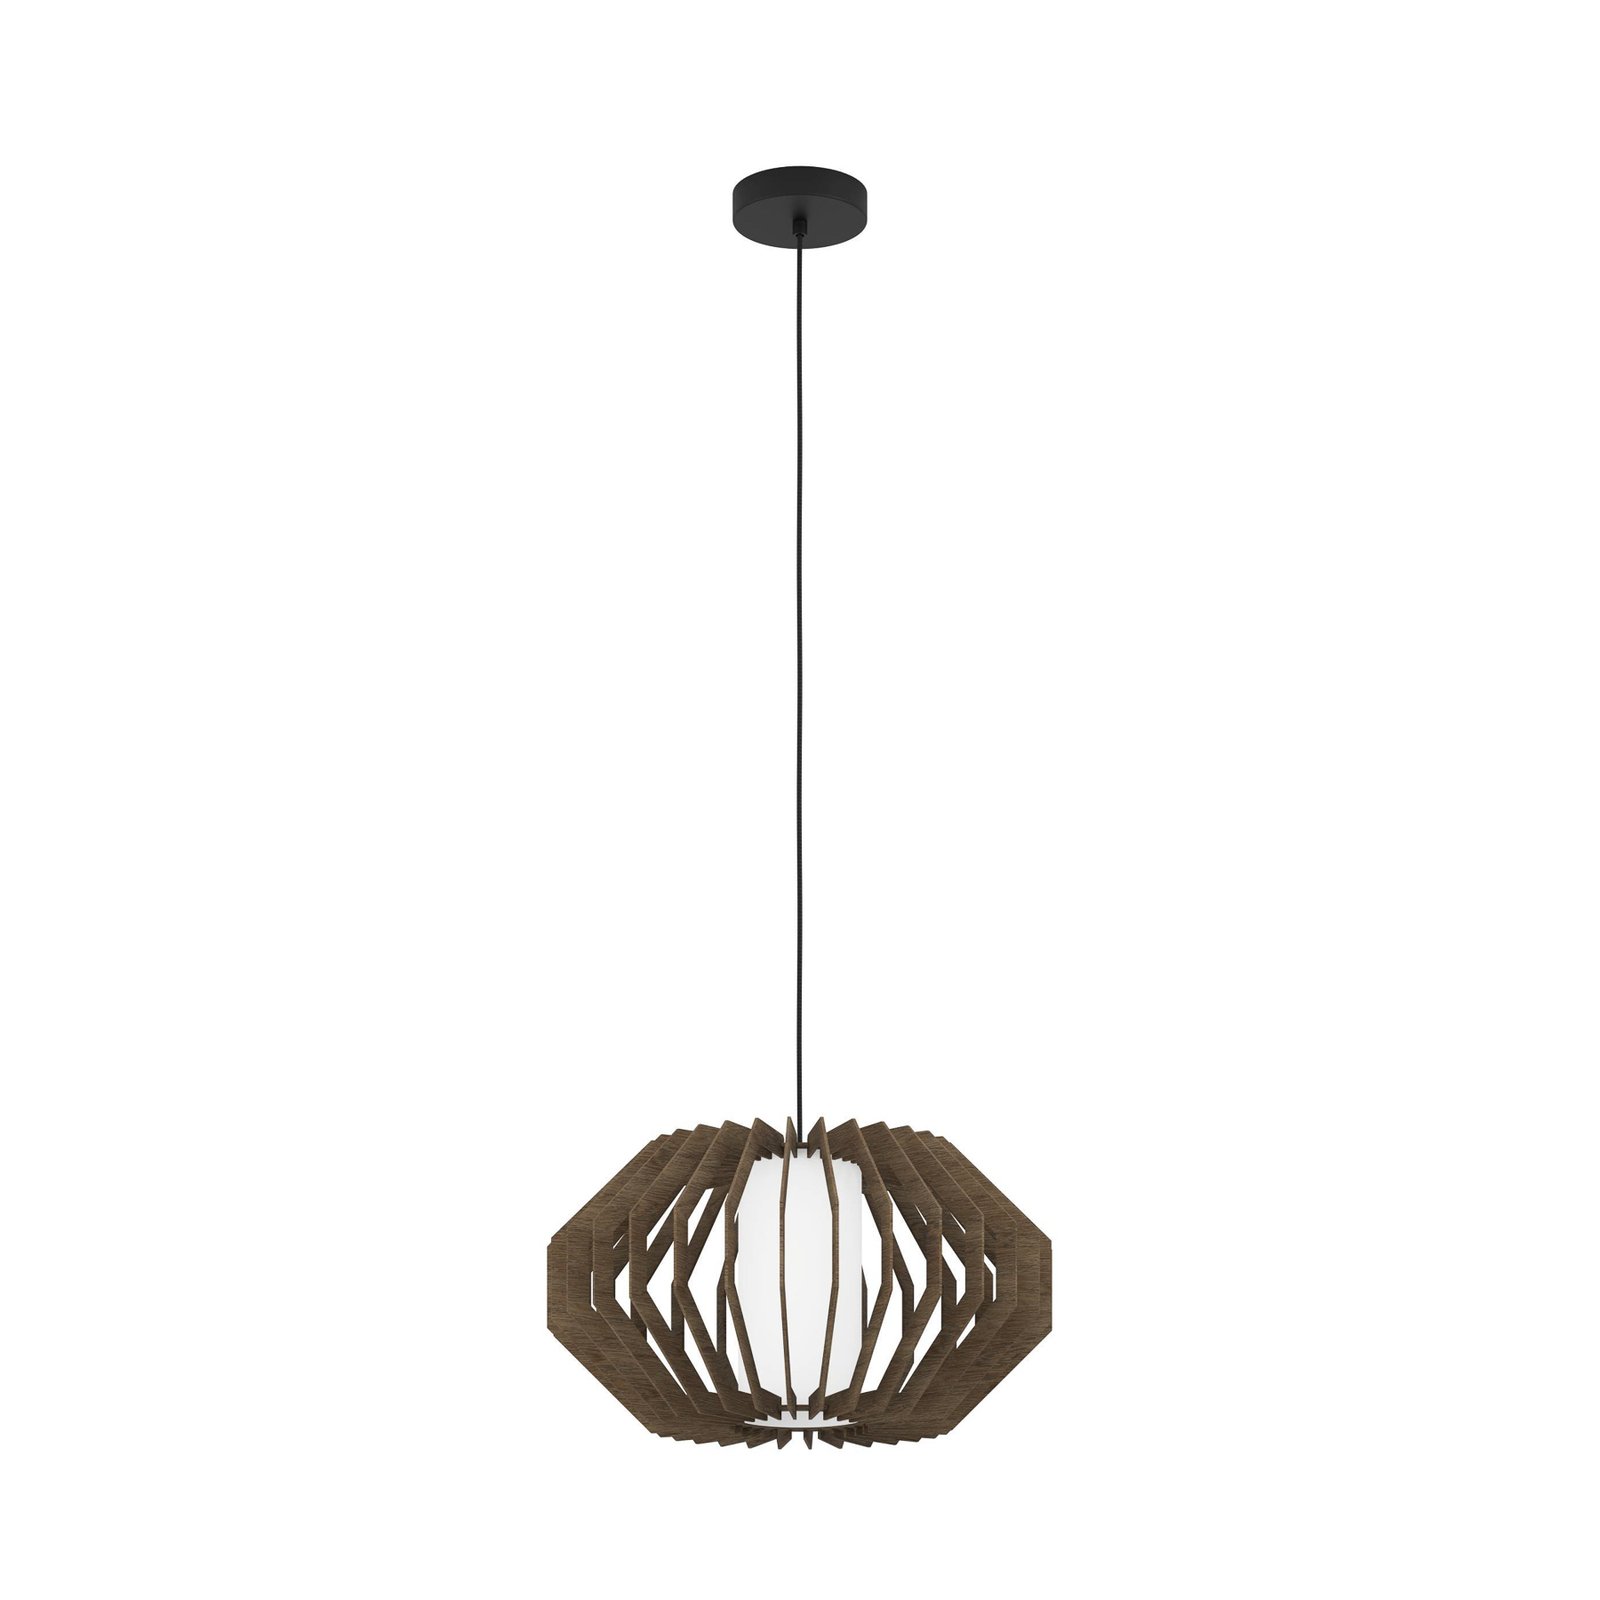 Rusticaria pendant light with wooden struts